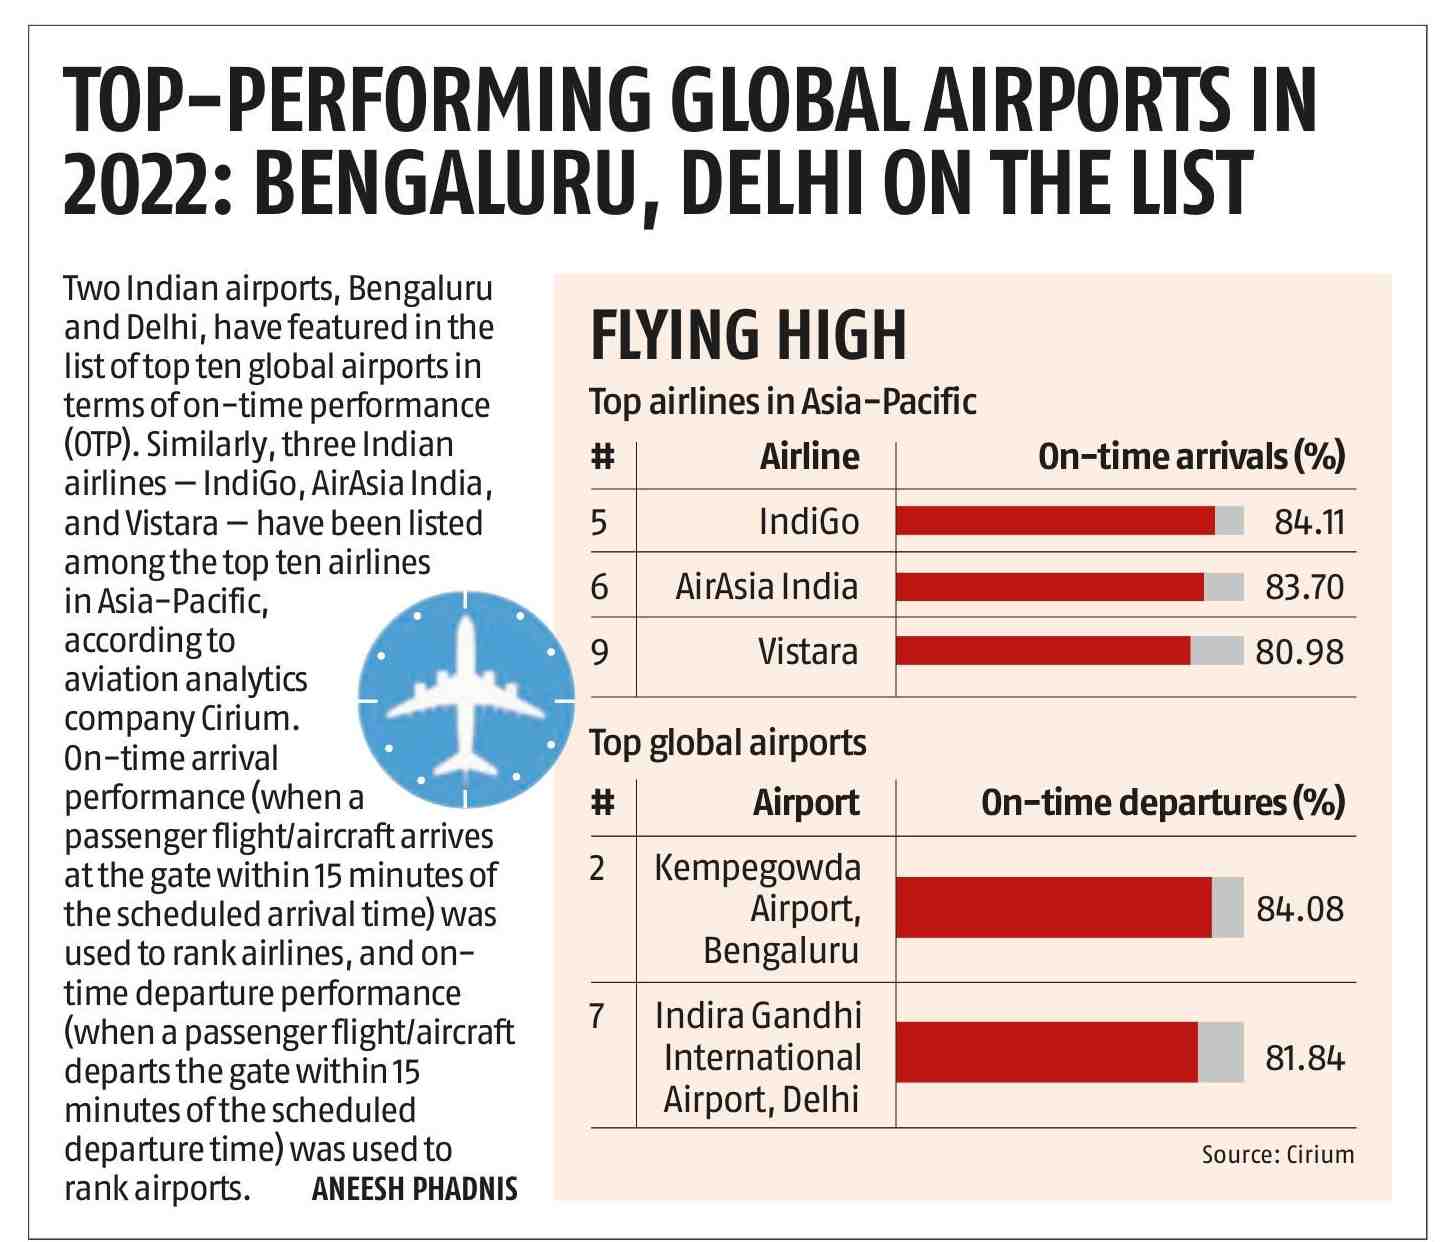 Top performing Global Airports in 2022